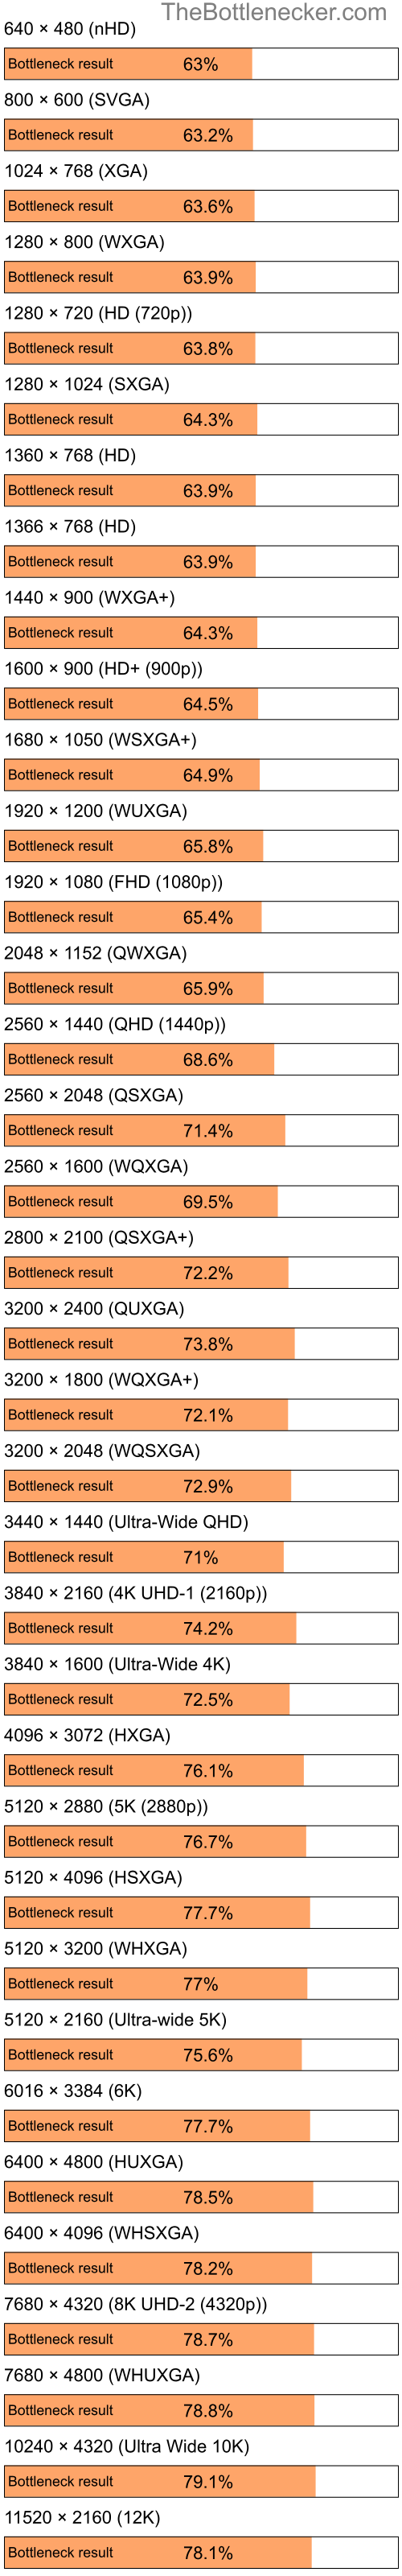 Bottleneck results by resolution for Intel Celeron and NVIDIA Quadro FX 370M in General Tasks